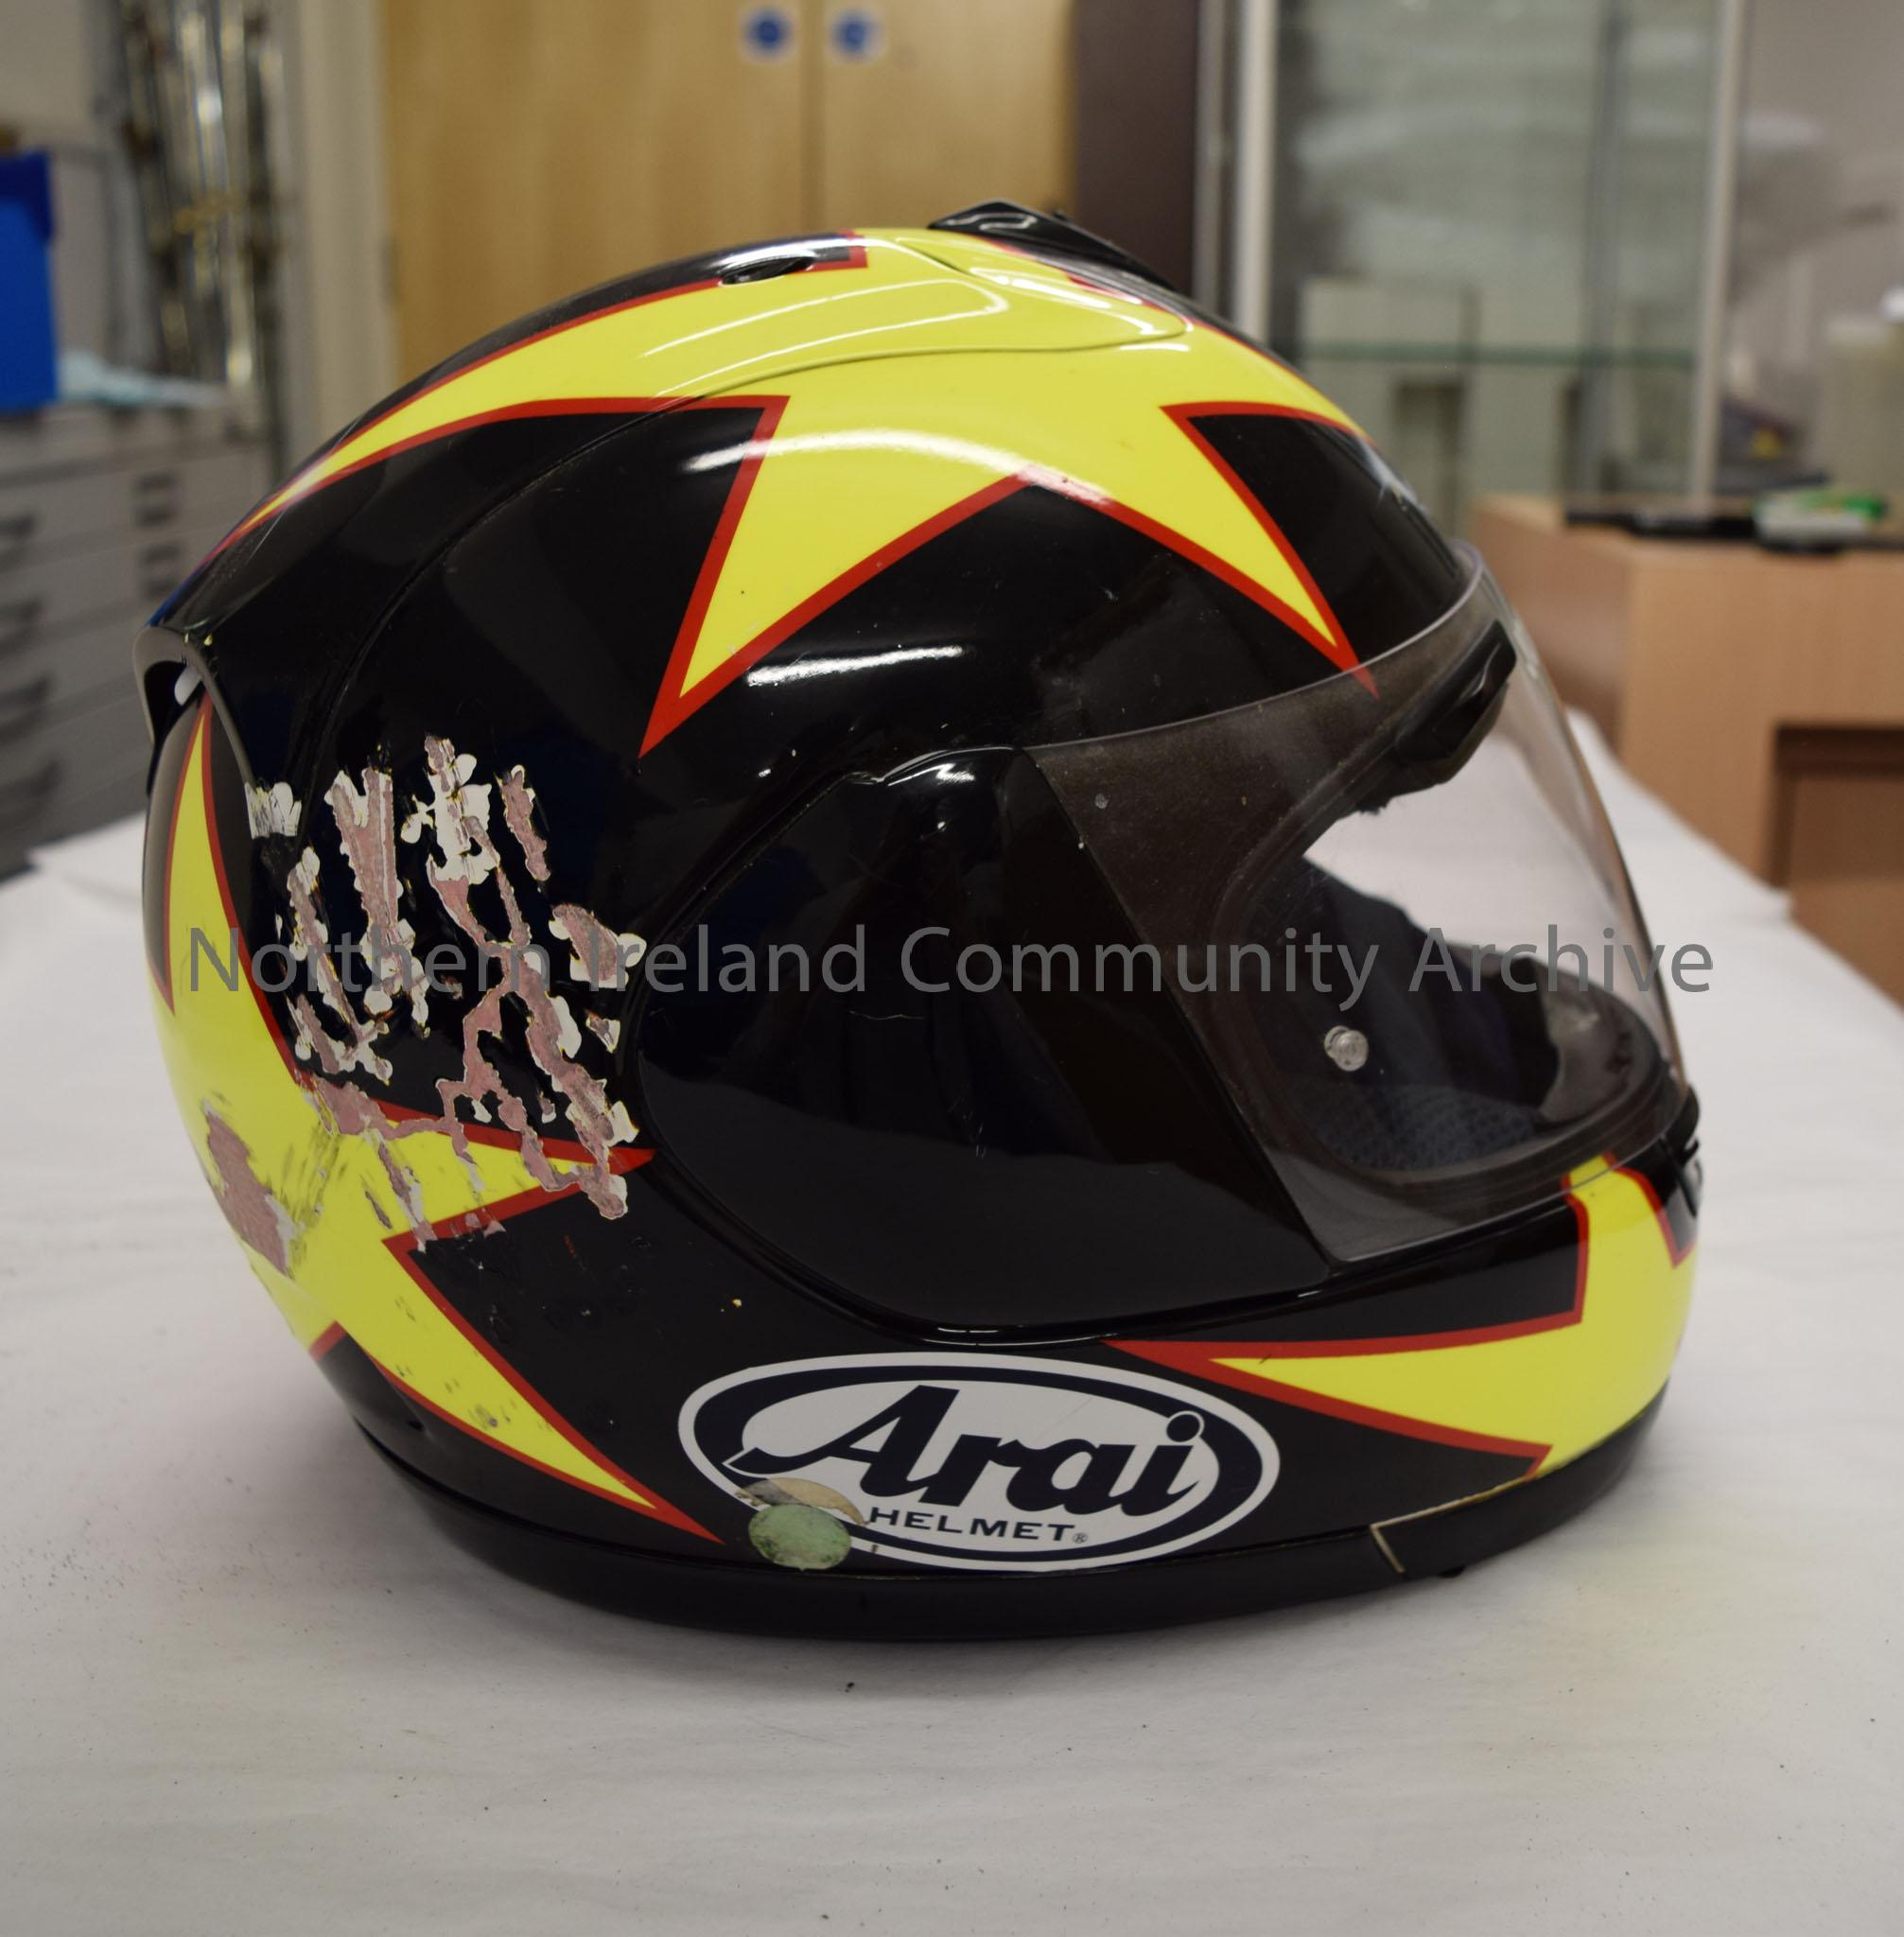 Arai motorcycle helmet belonging to John Donnan. Black helmet with yellow stars with a red border on it (two on the chin bar, two on the top and two o… – 2016.60 (5)